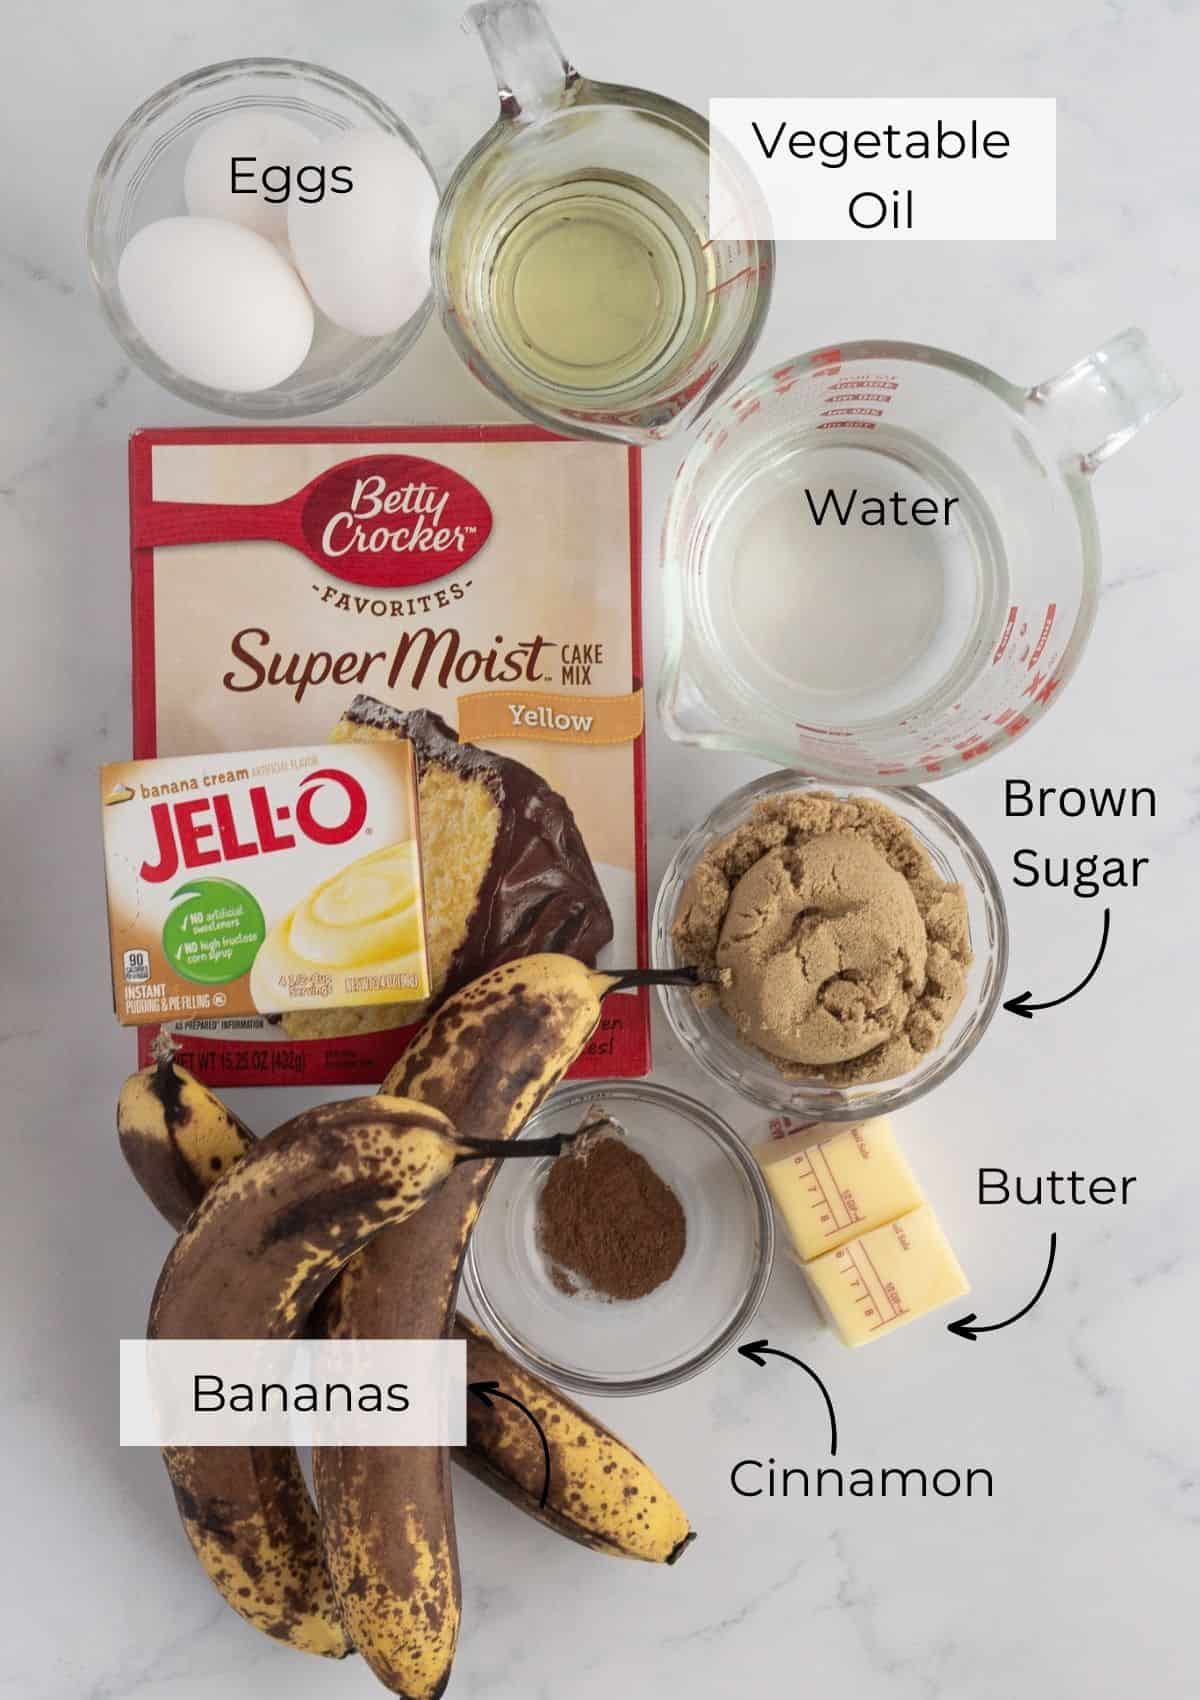 The ingredients needed for this Banana Upside Down Cake.